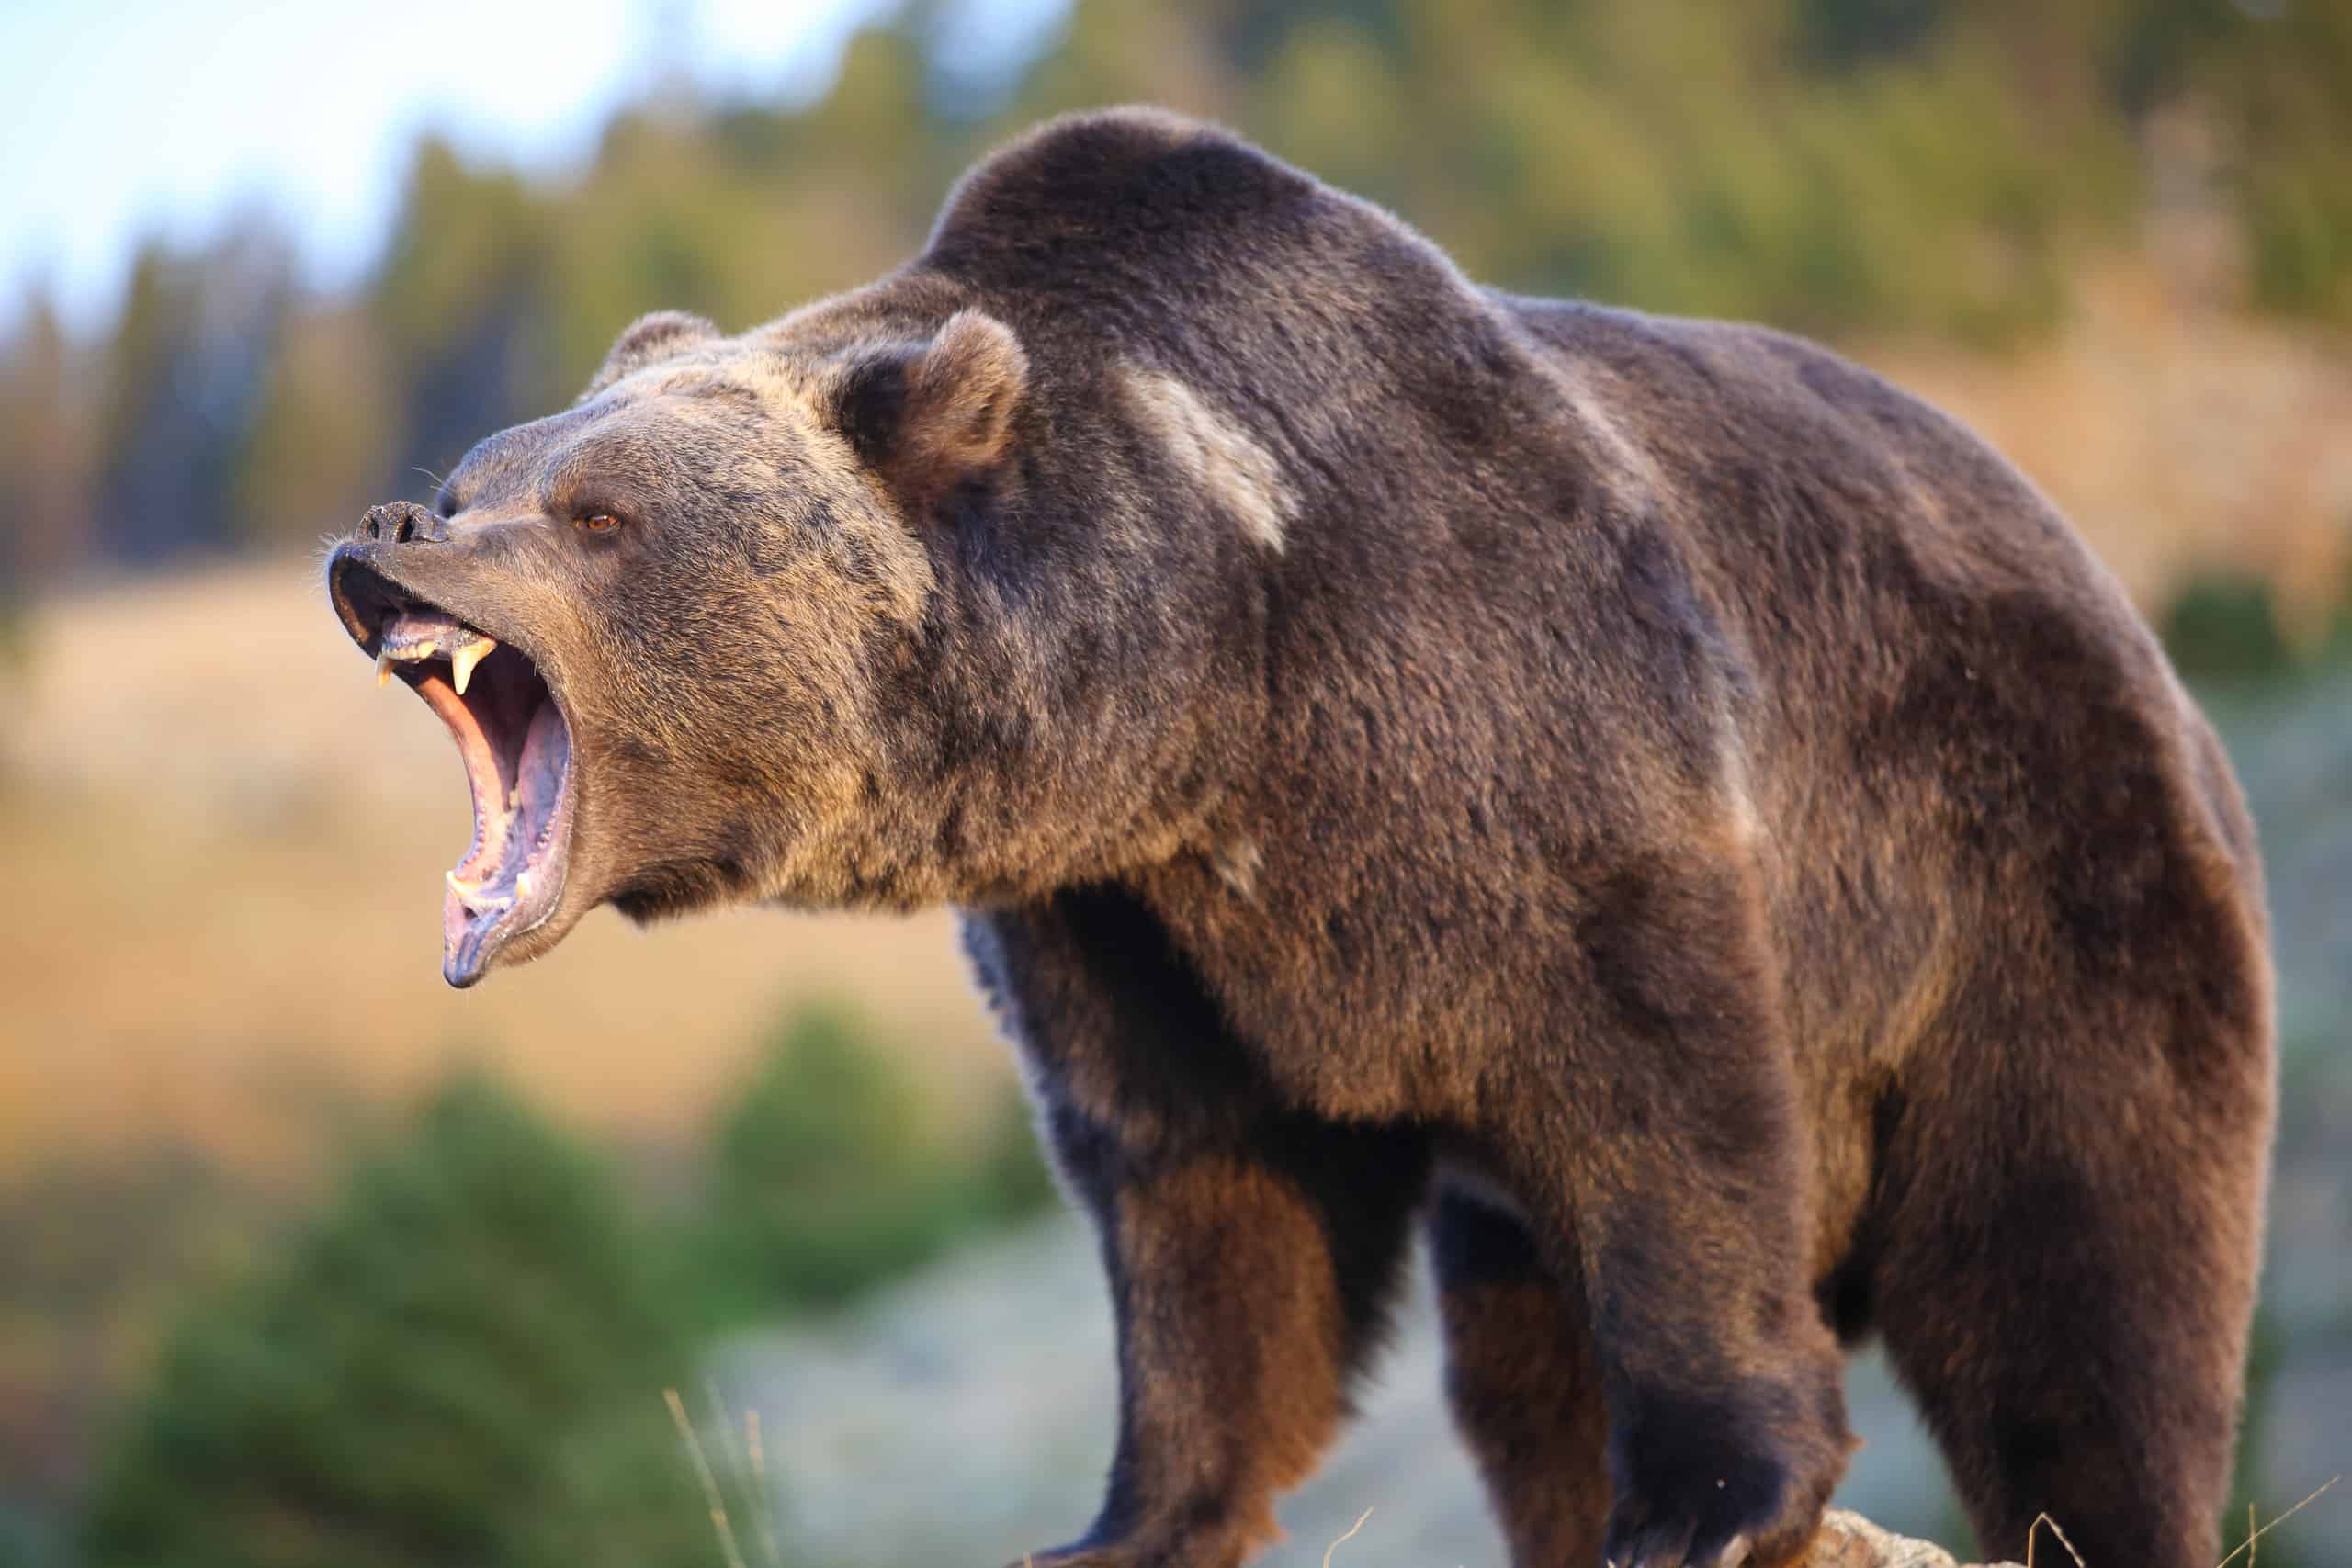 "A full 6 percent of Americans reckon they could beat a grizzly bear in unarmed combat.